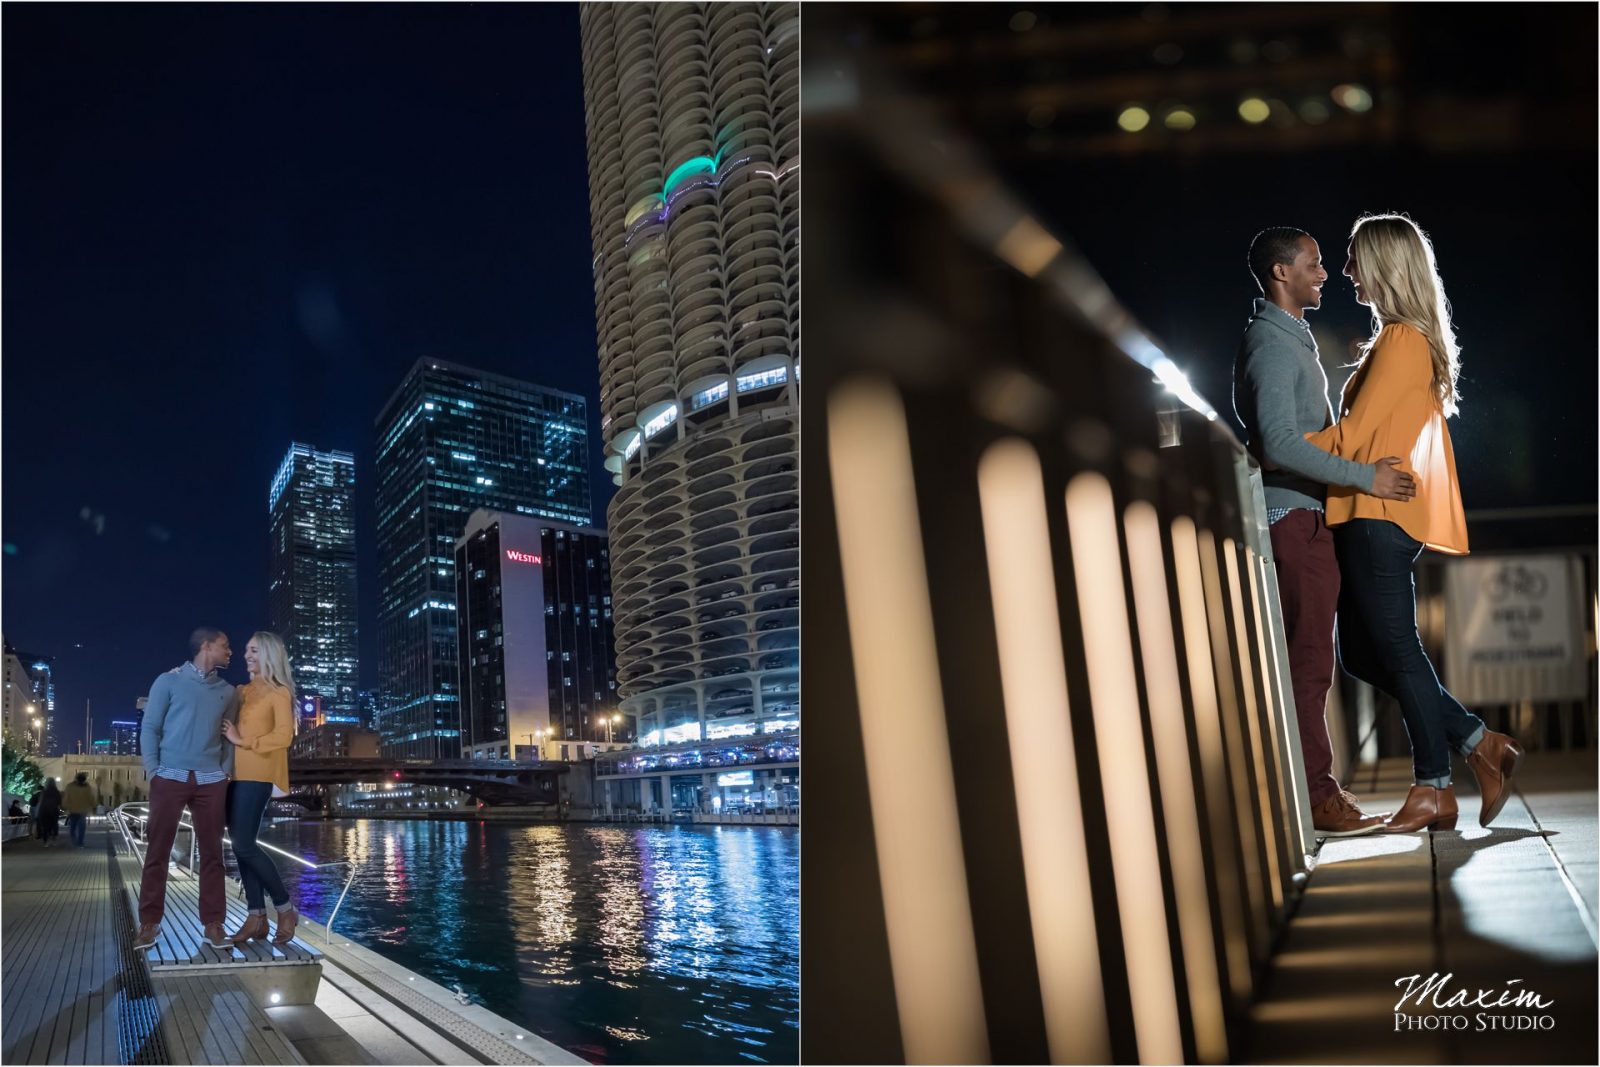 Chicago Downtown Day night After Dark Engagement